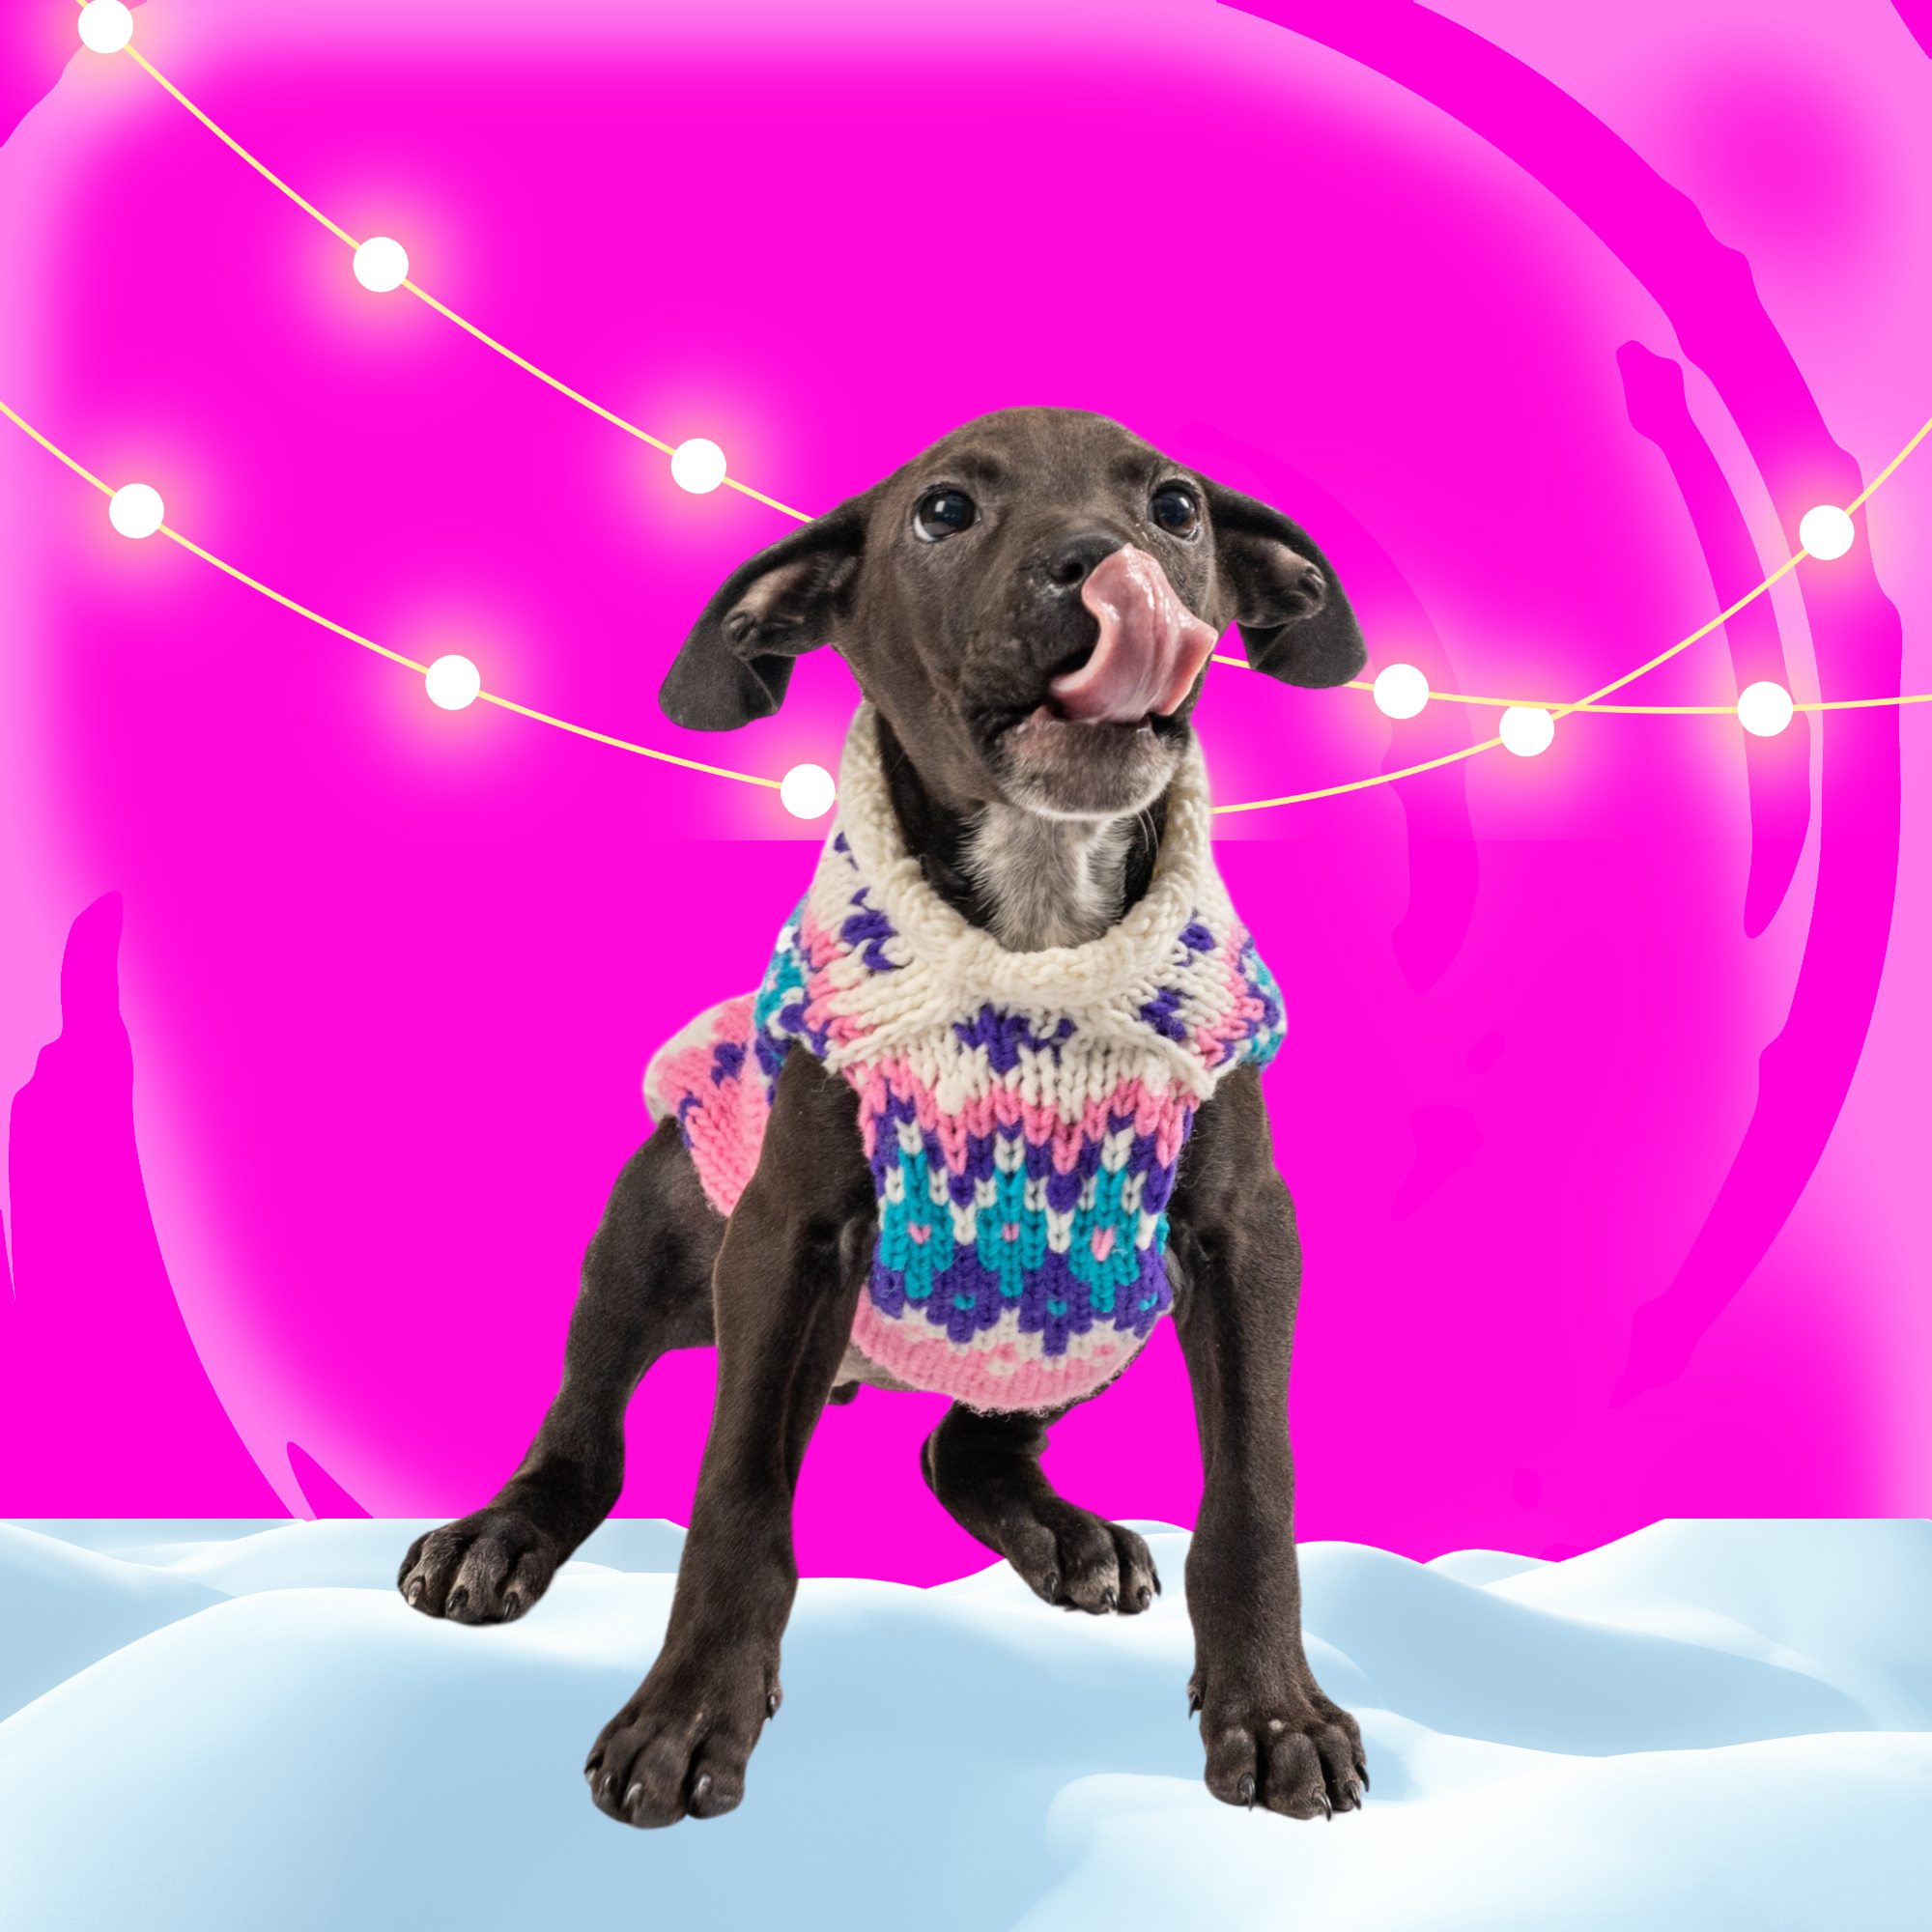 Should dogs wear coats or sweaters in the winter badge